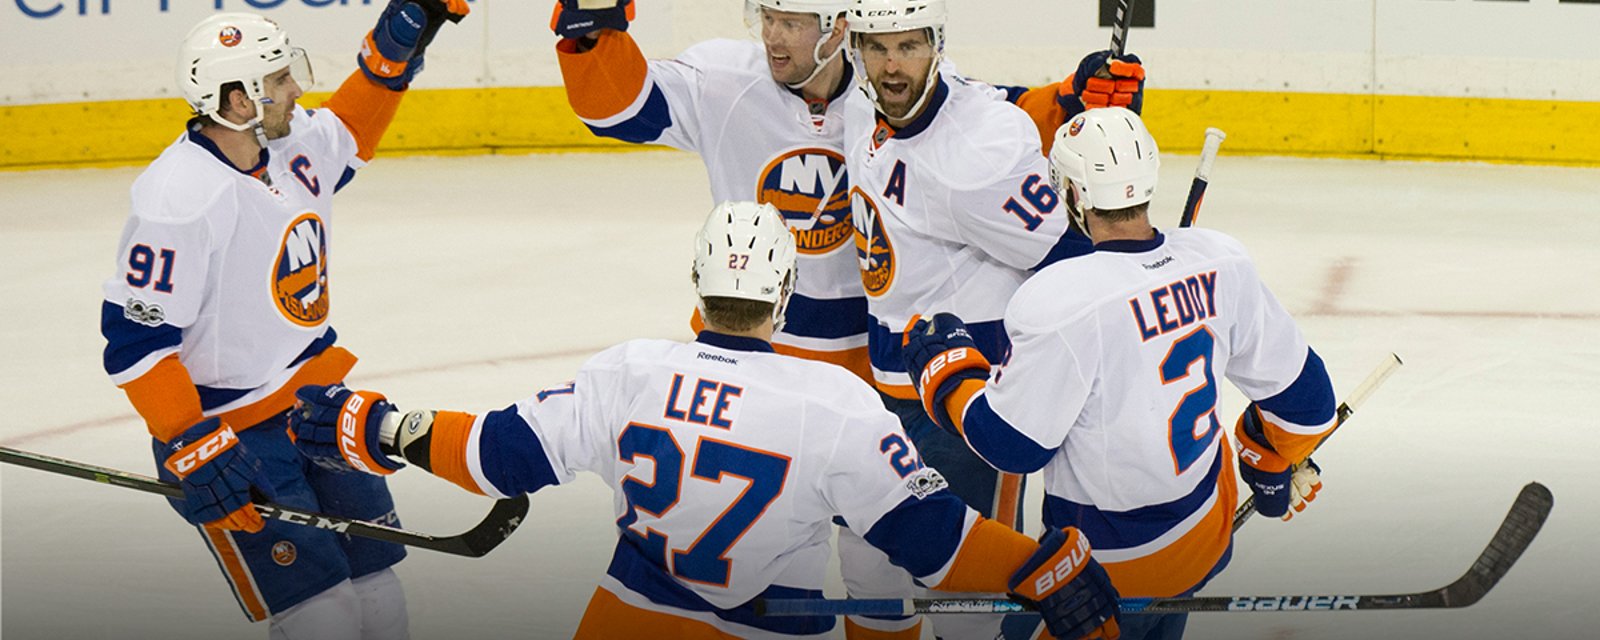 Your Call: Are the Islanders better or worse?